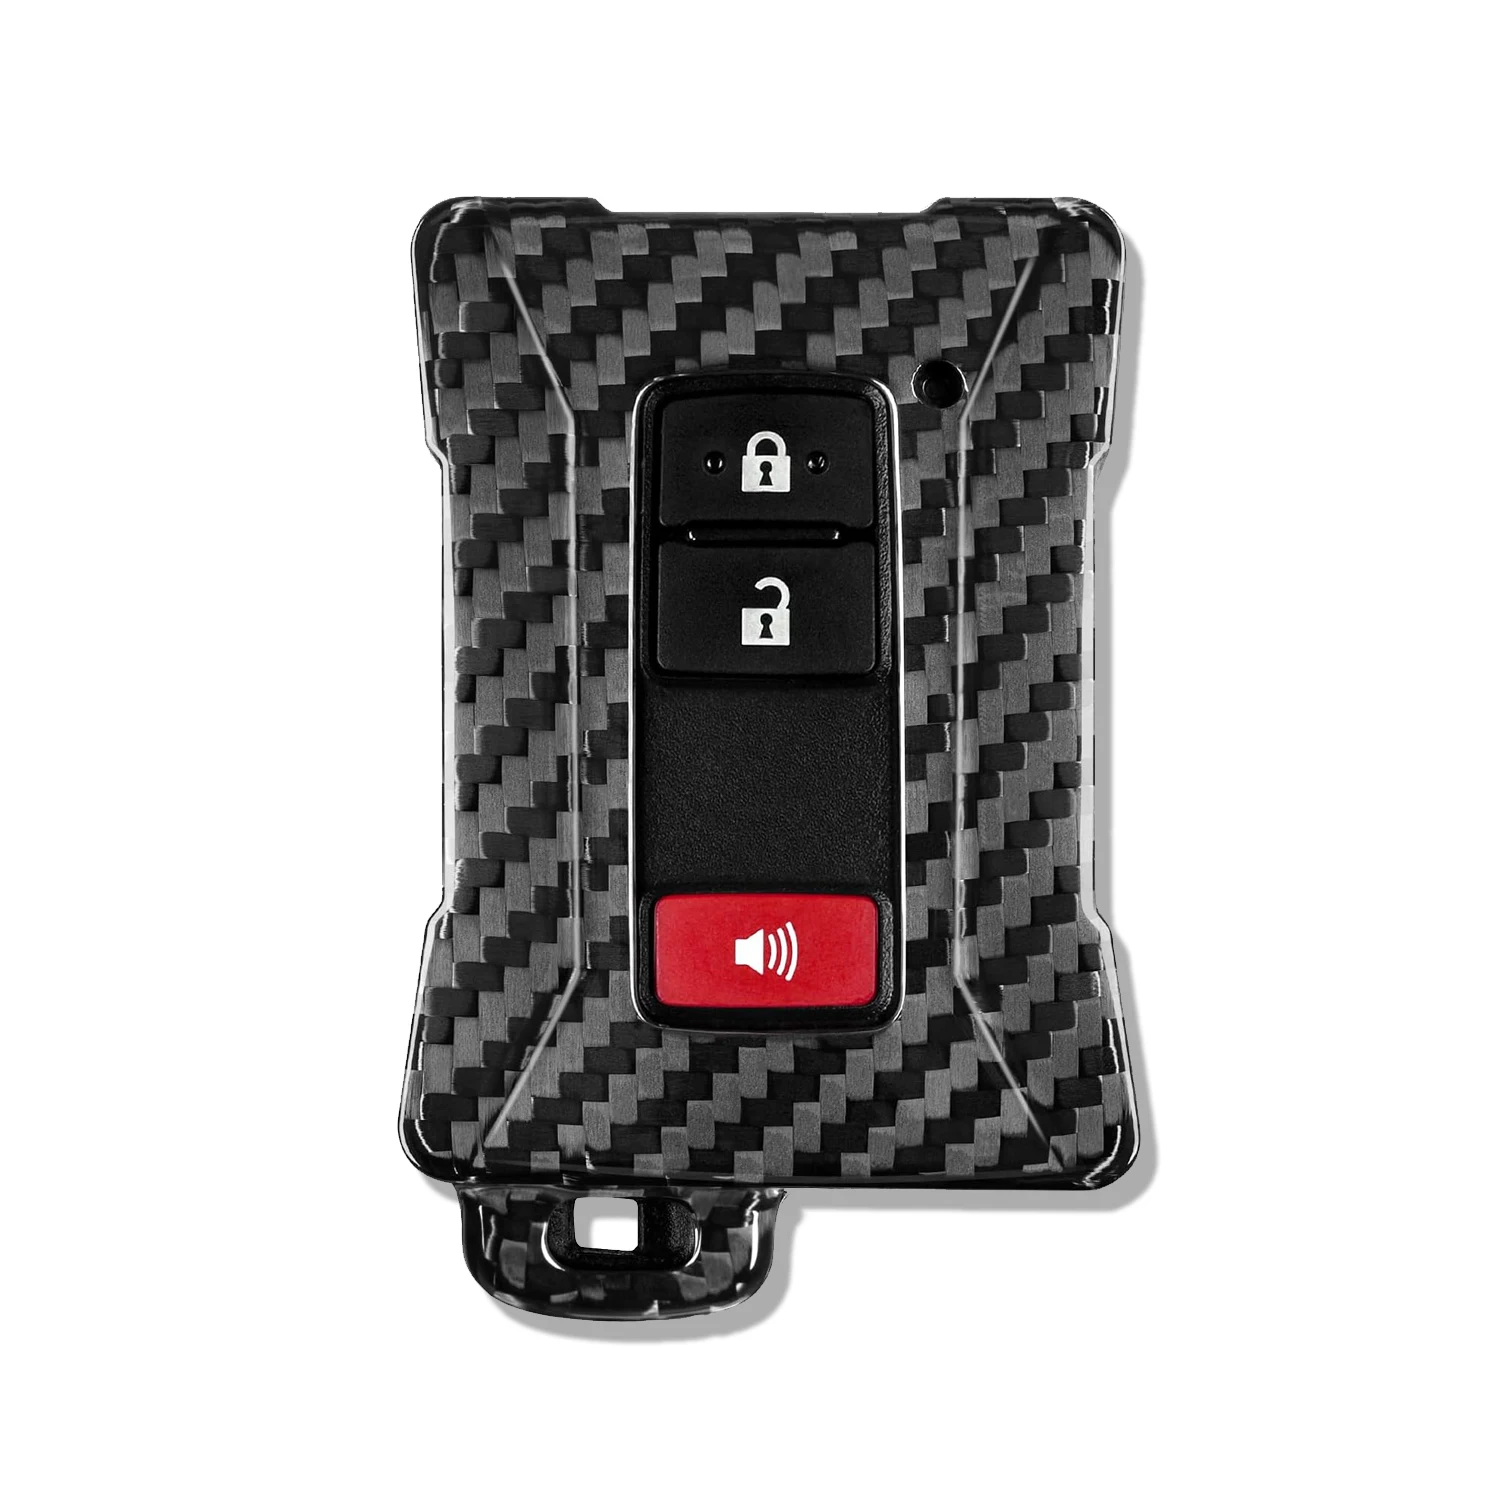 Carbon Fiber Key Fob Cover Case Shell Protector for Toyota Tacoma 4Runner Sequoia RAV4 Tundra Land Cruise Avalon 3/4Buttons